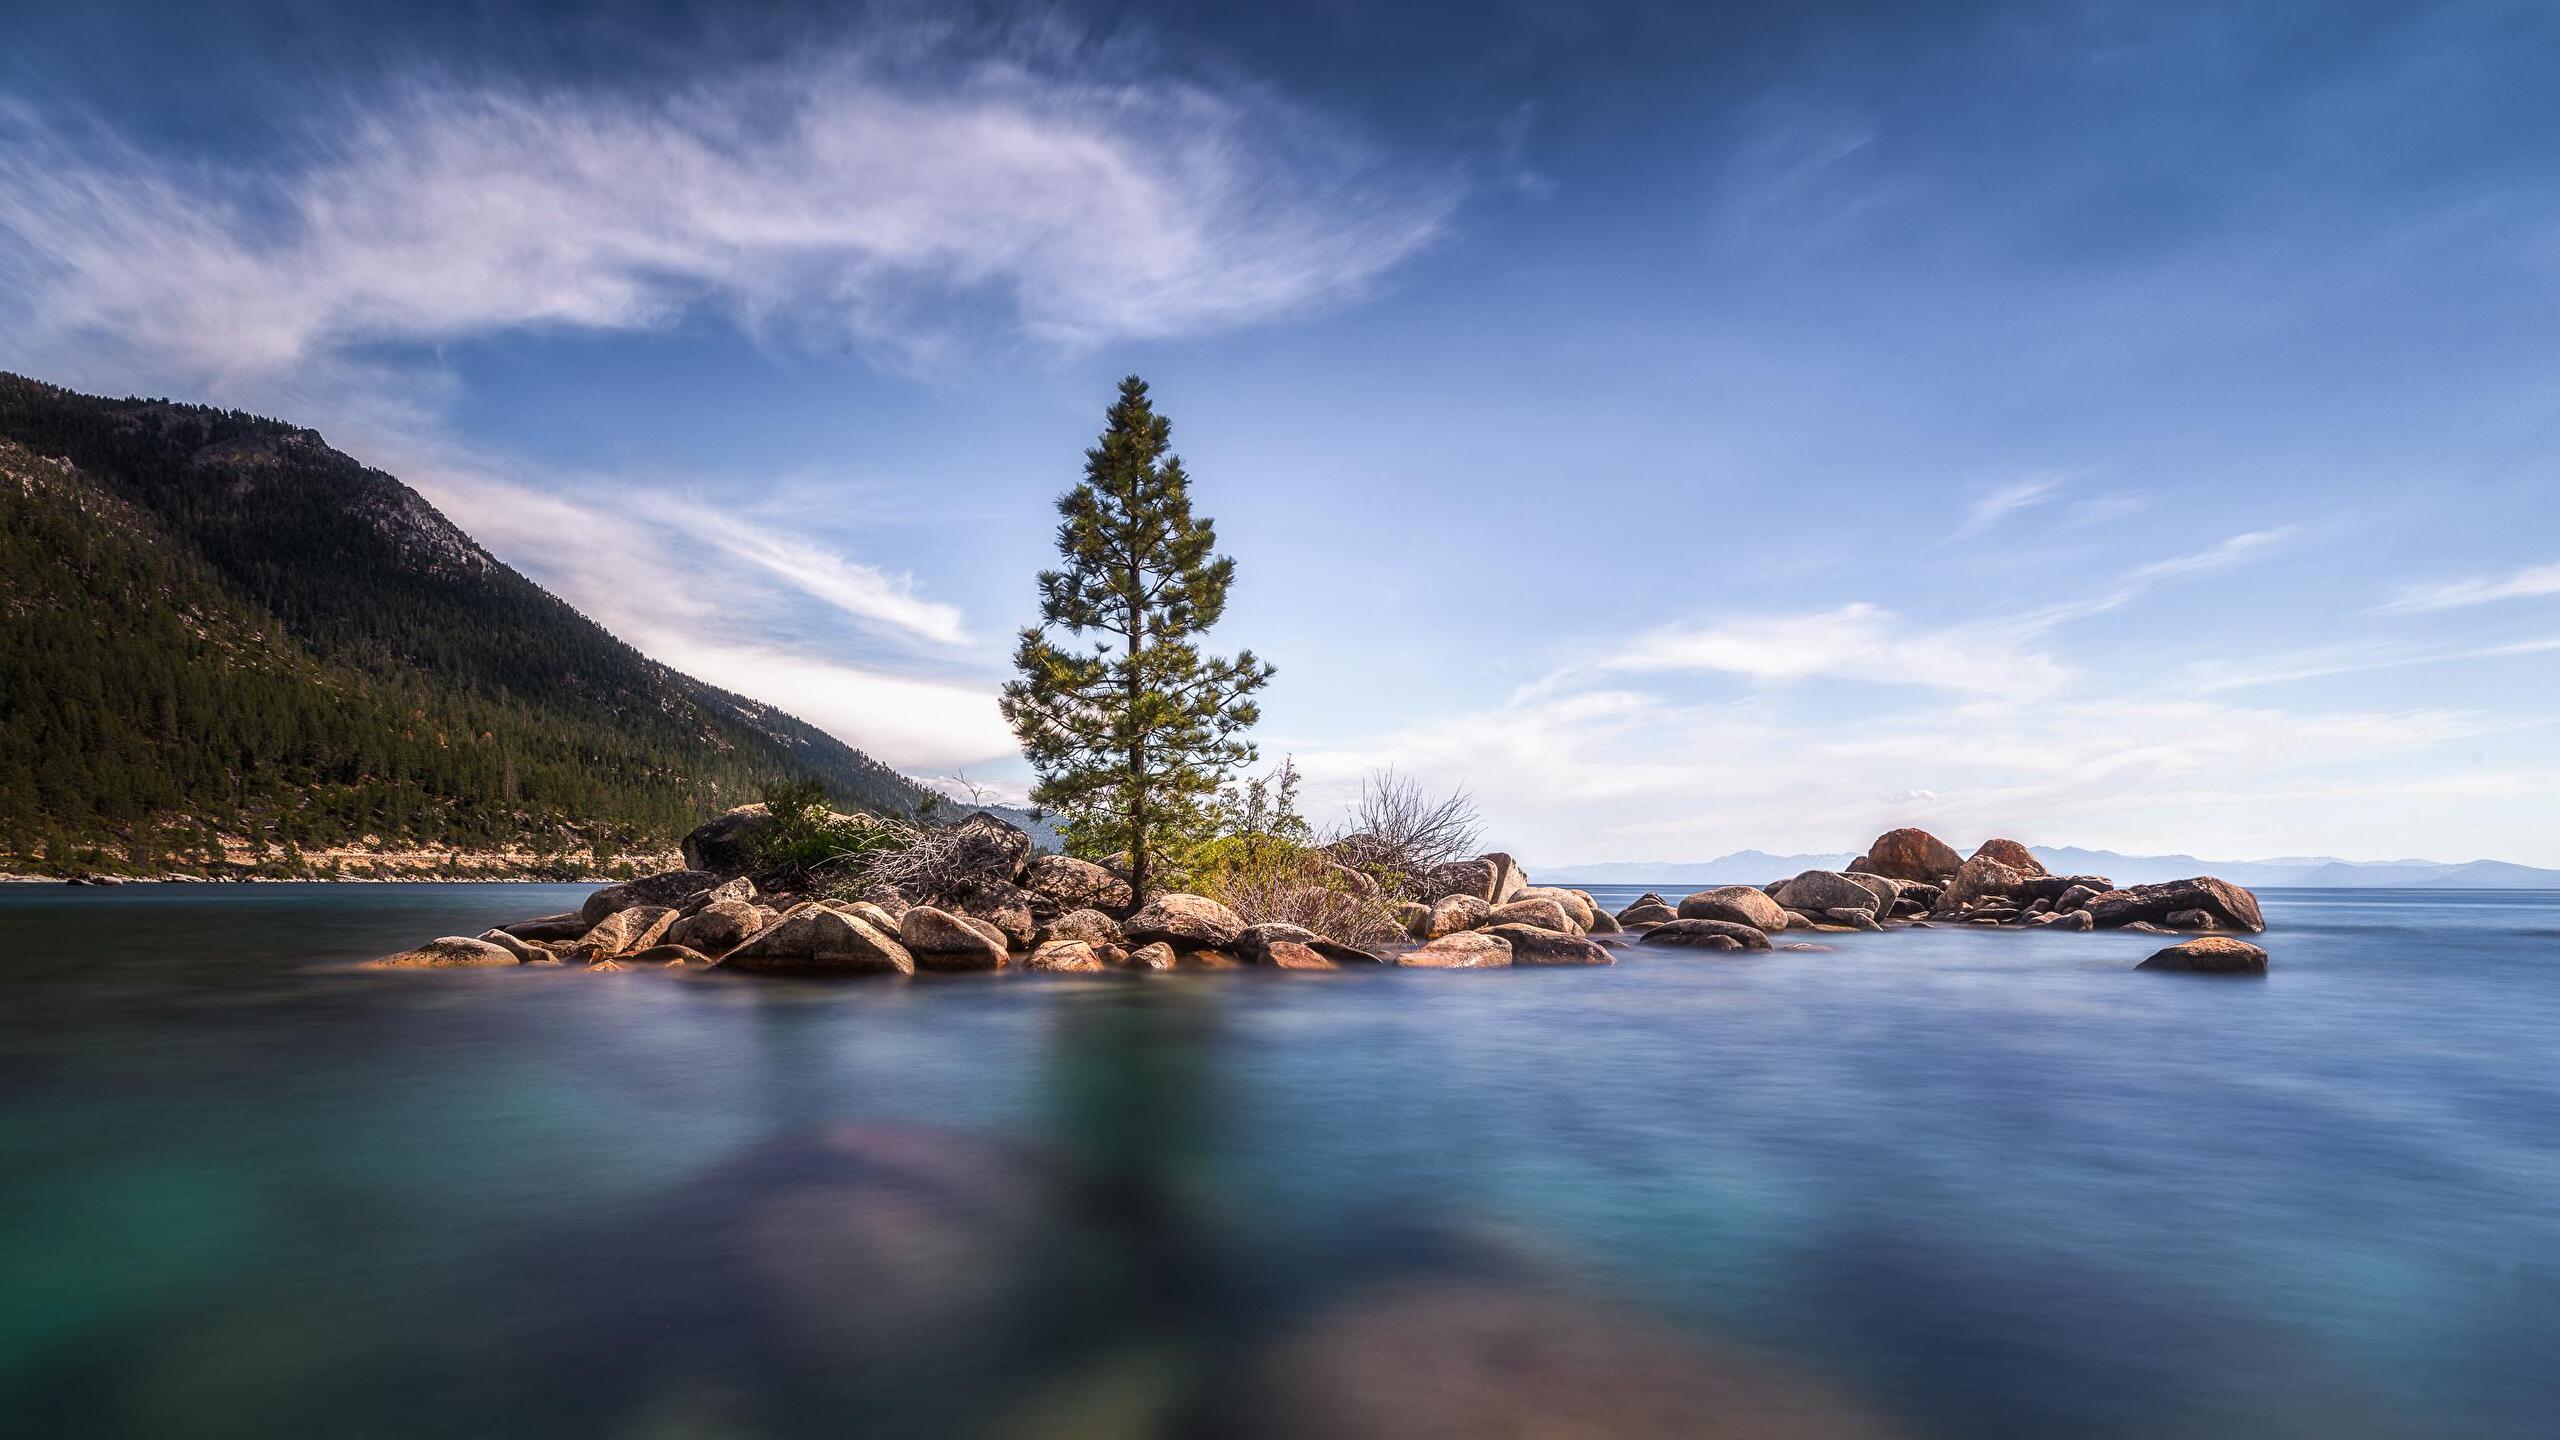 2560x1440 Tahoe 4k Wallpaper For Your Desktop Or Mobile Screen Free And Easy To Download